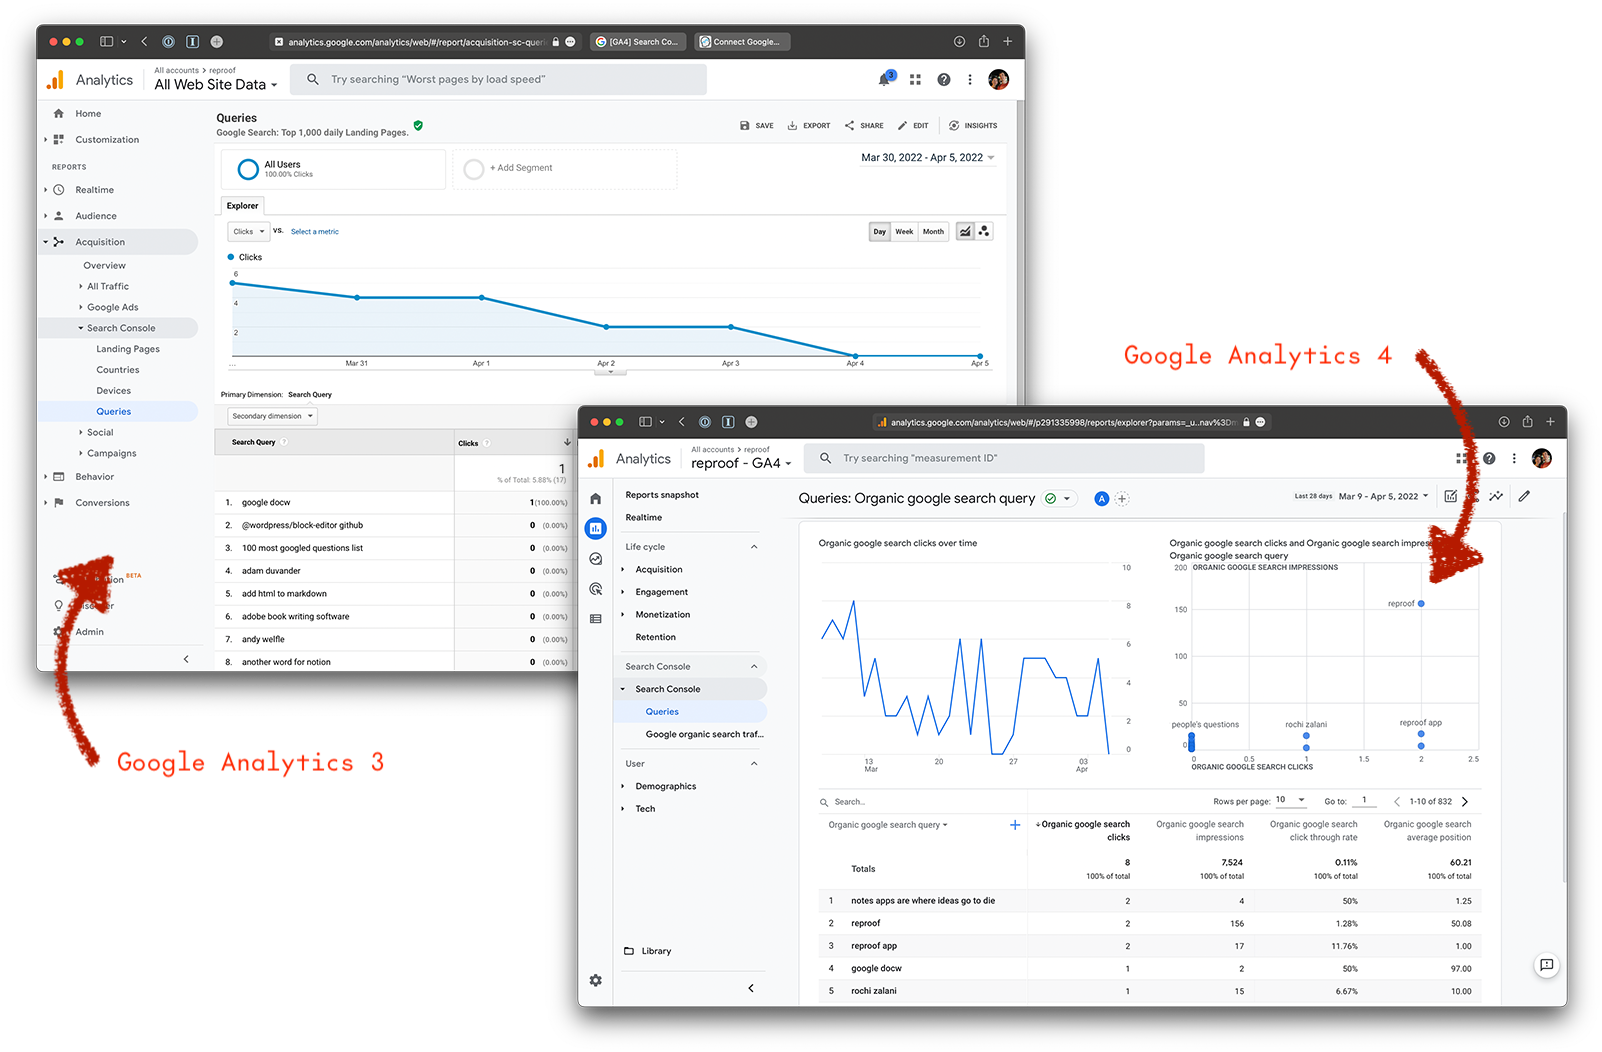 Search queries in Google Analytics 3 vs 4